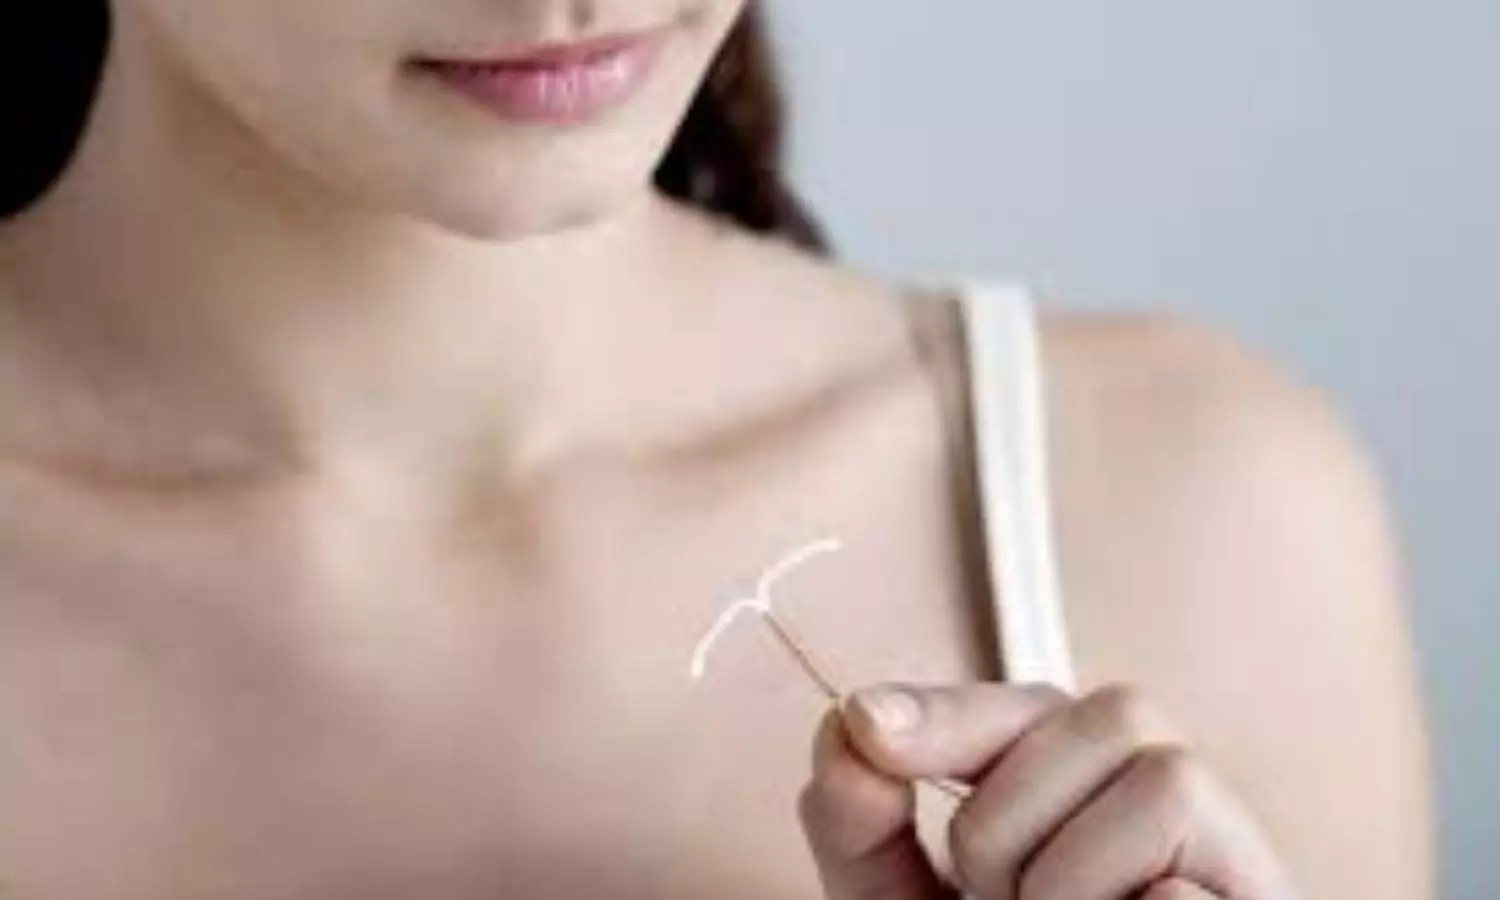 IUD insertion in early postpartum period linked to perforation risk: Lancet